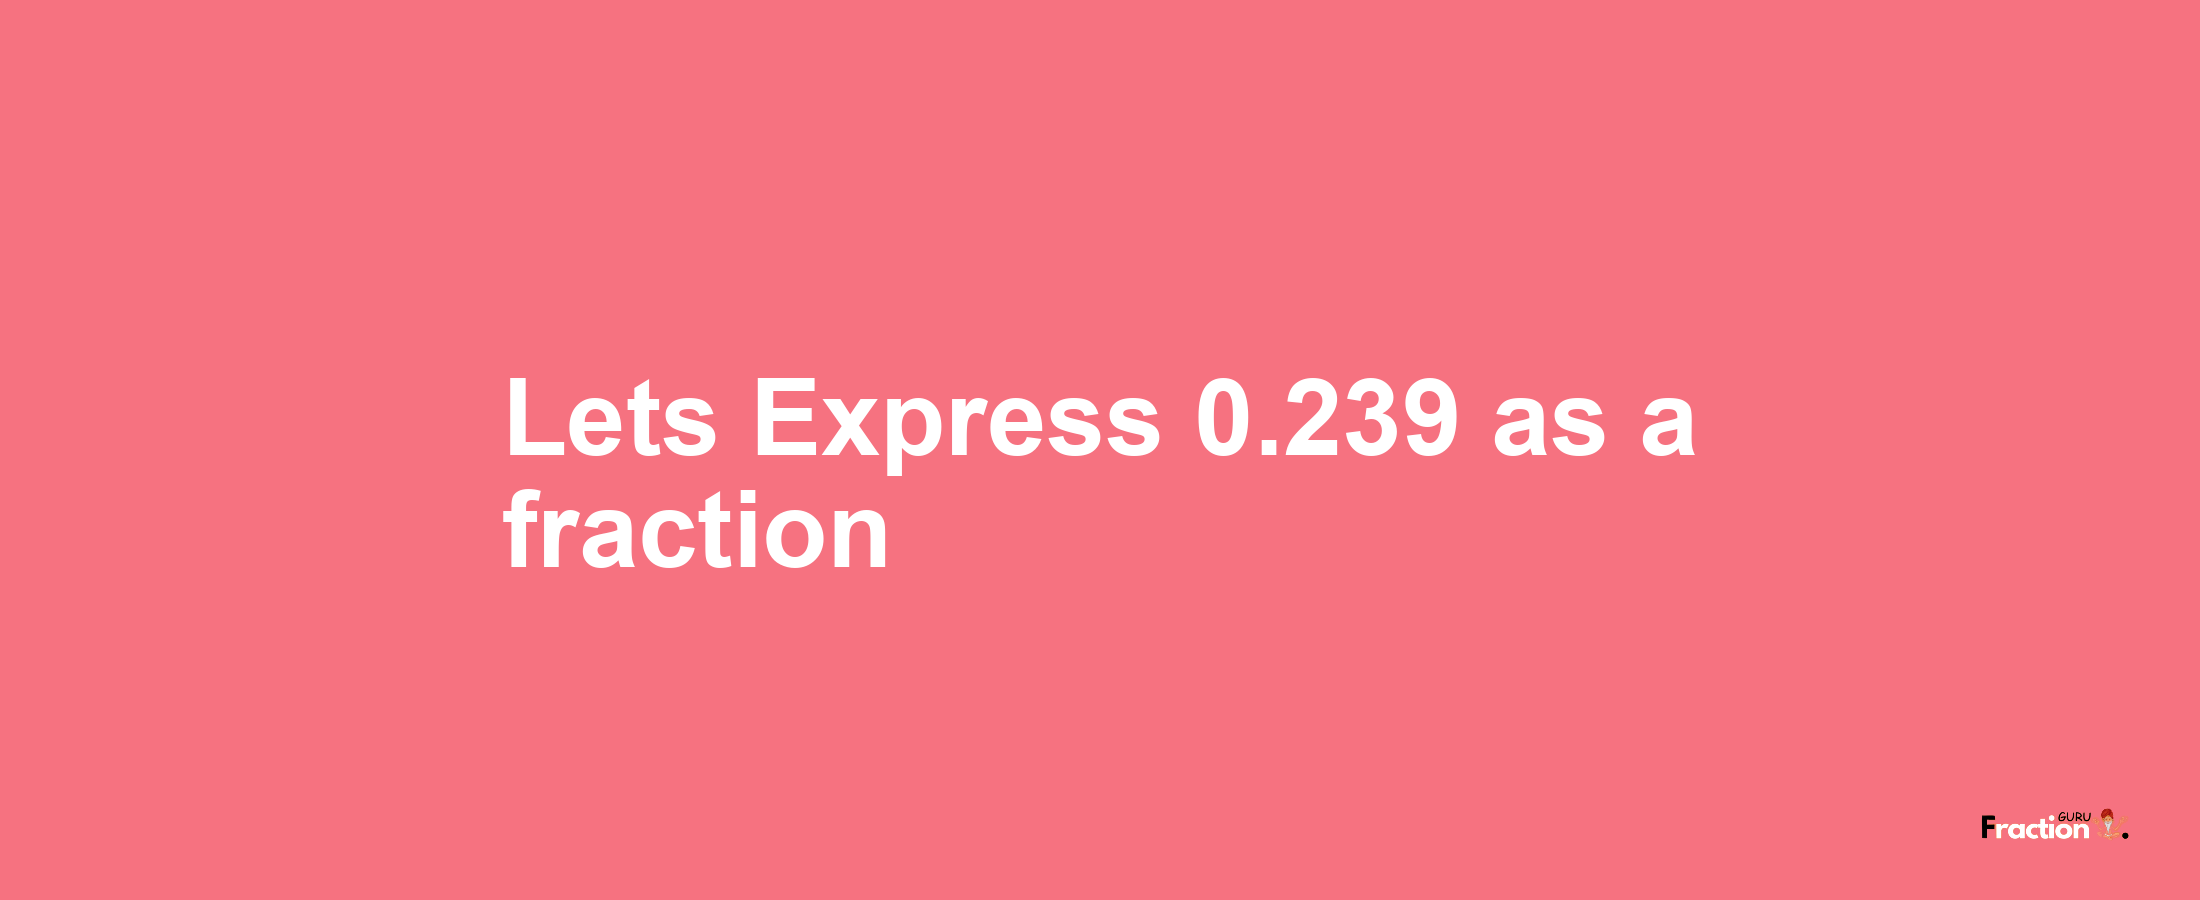 Lets Express 0.239 as afraction